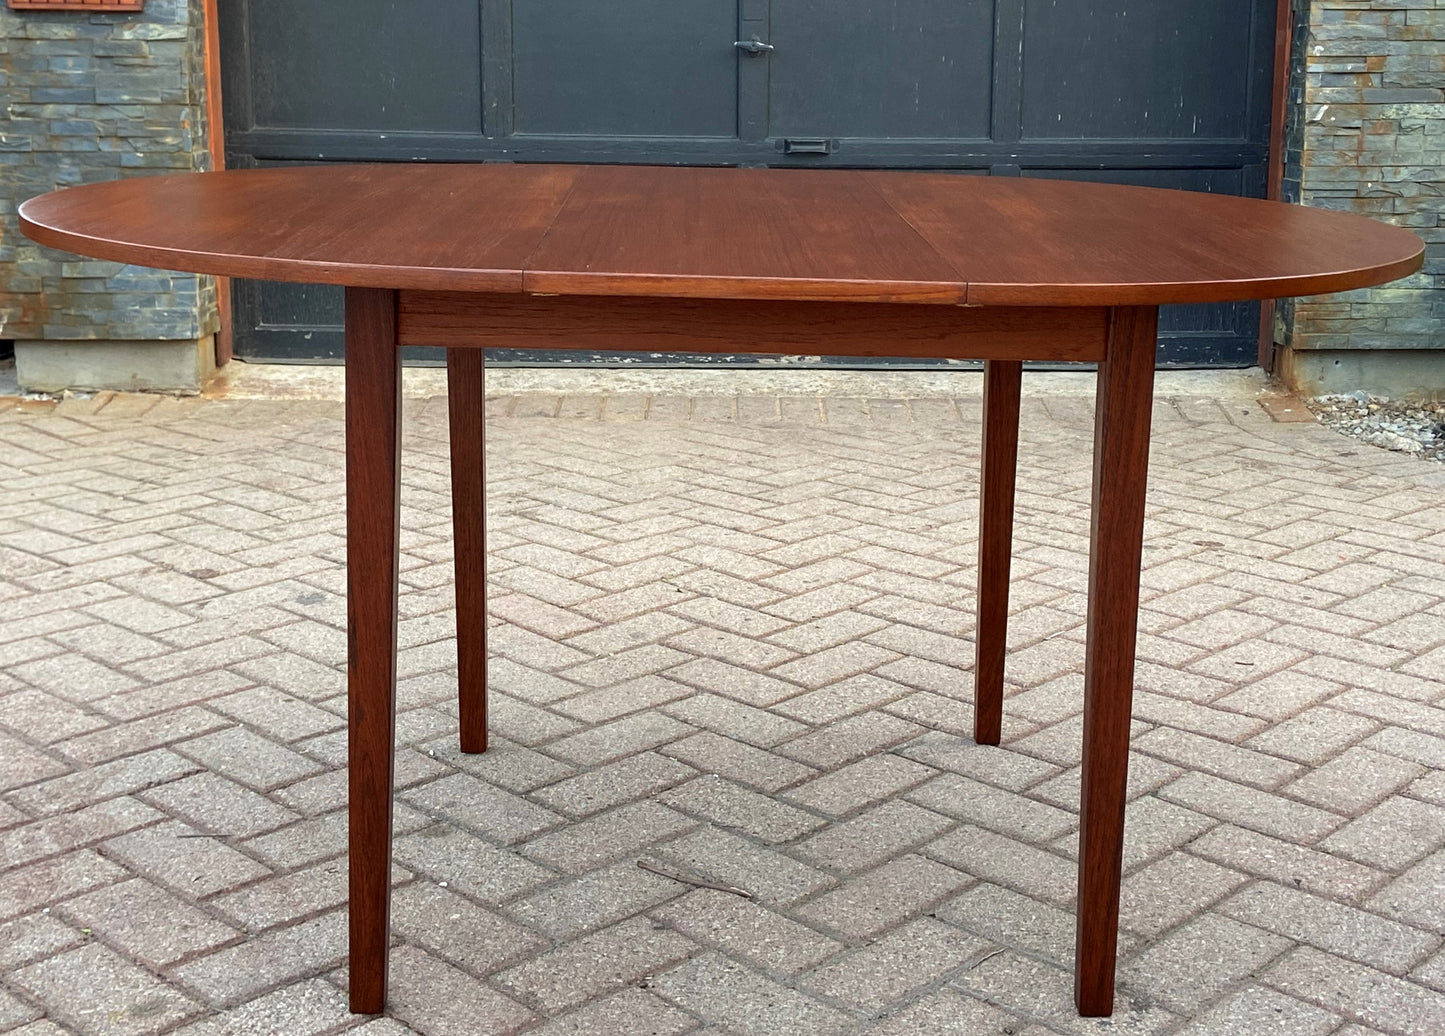 REFINISHED MCM Teak Table Round to Oval w 1 Leaf 42-56"